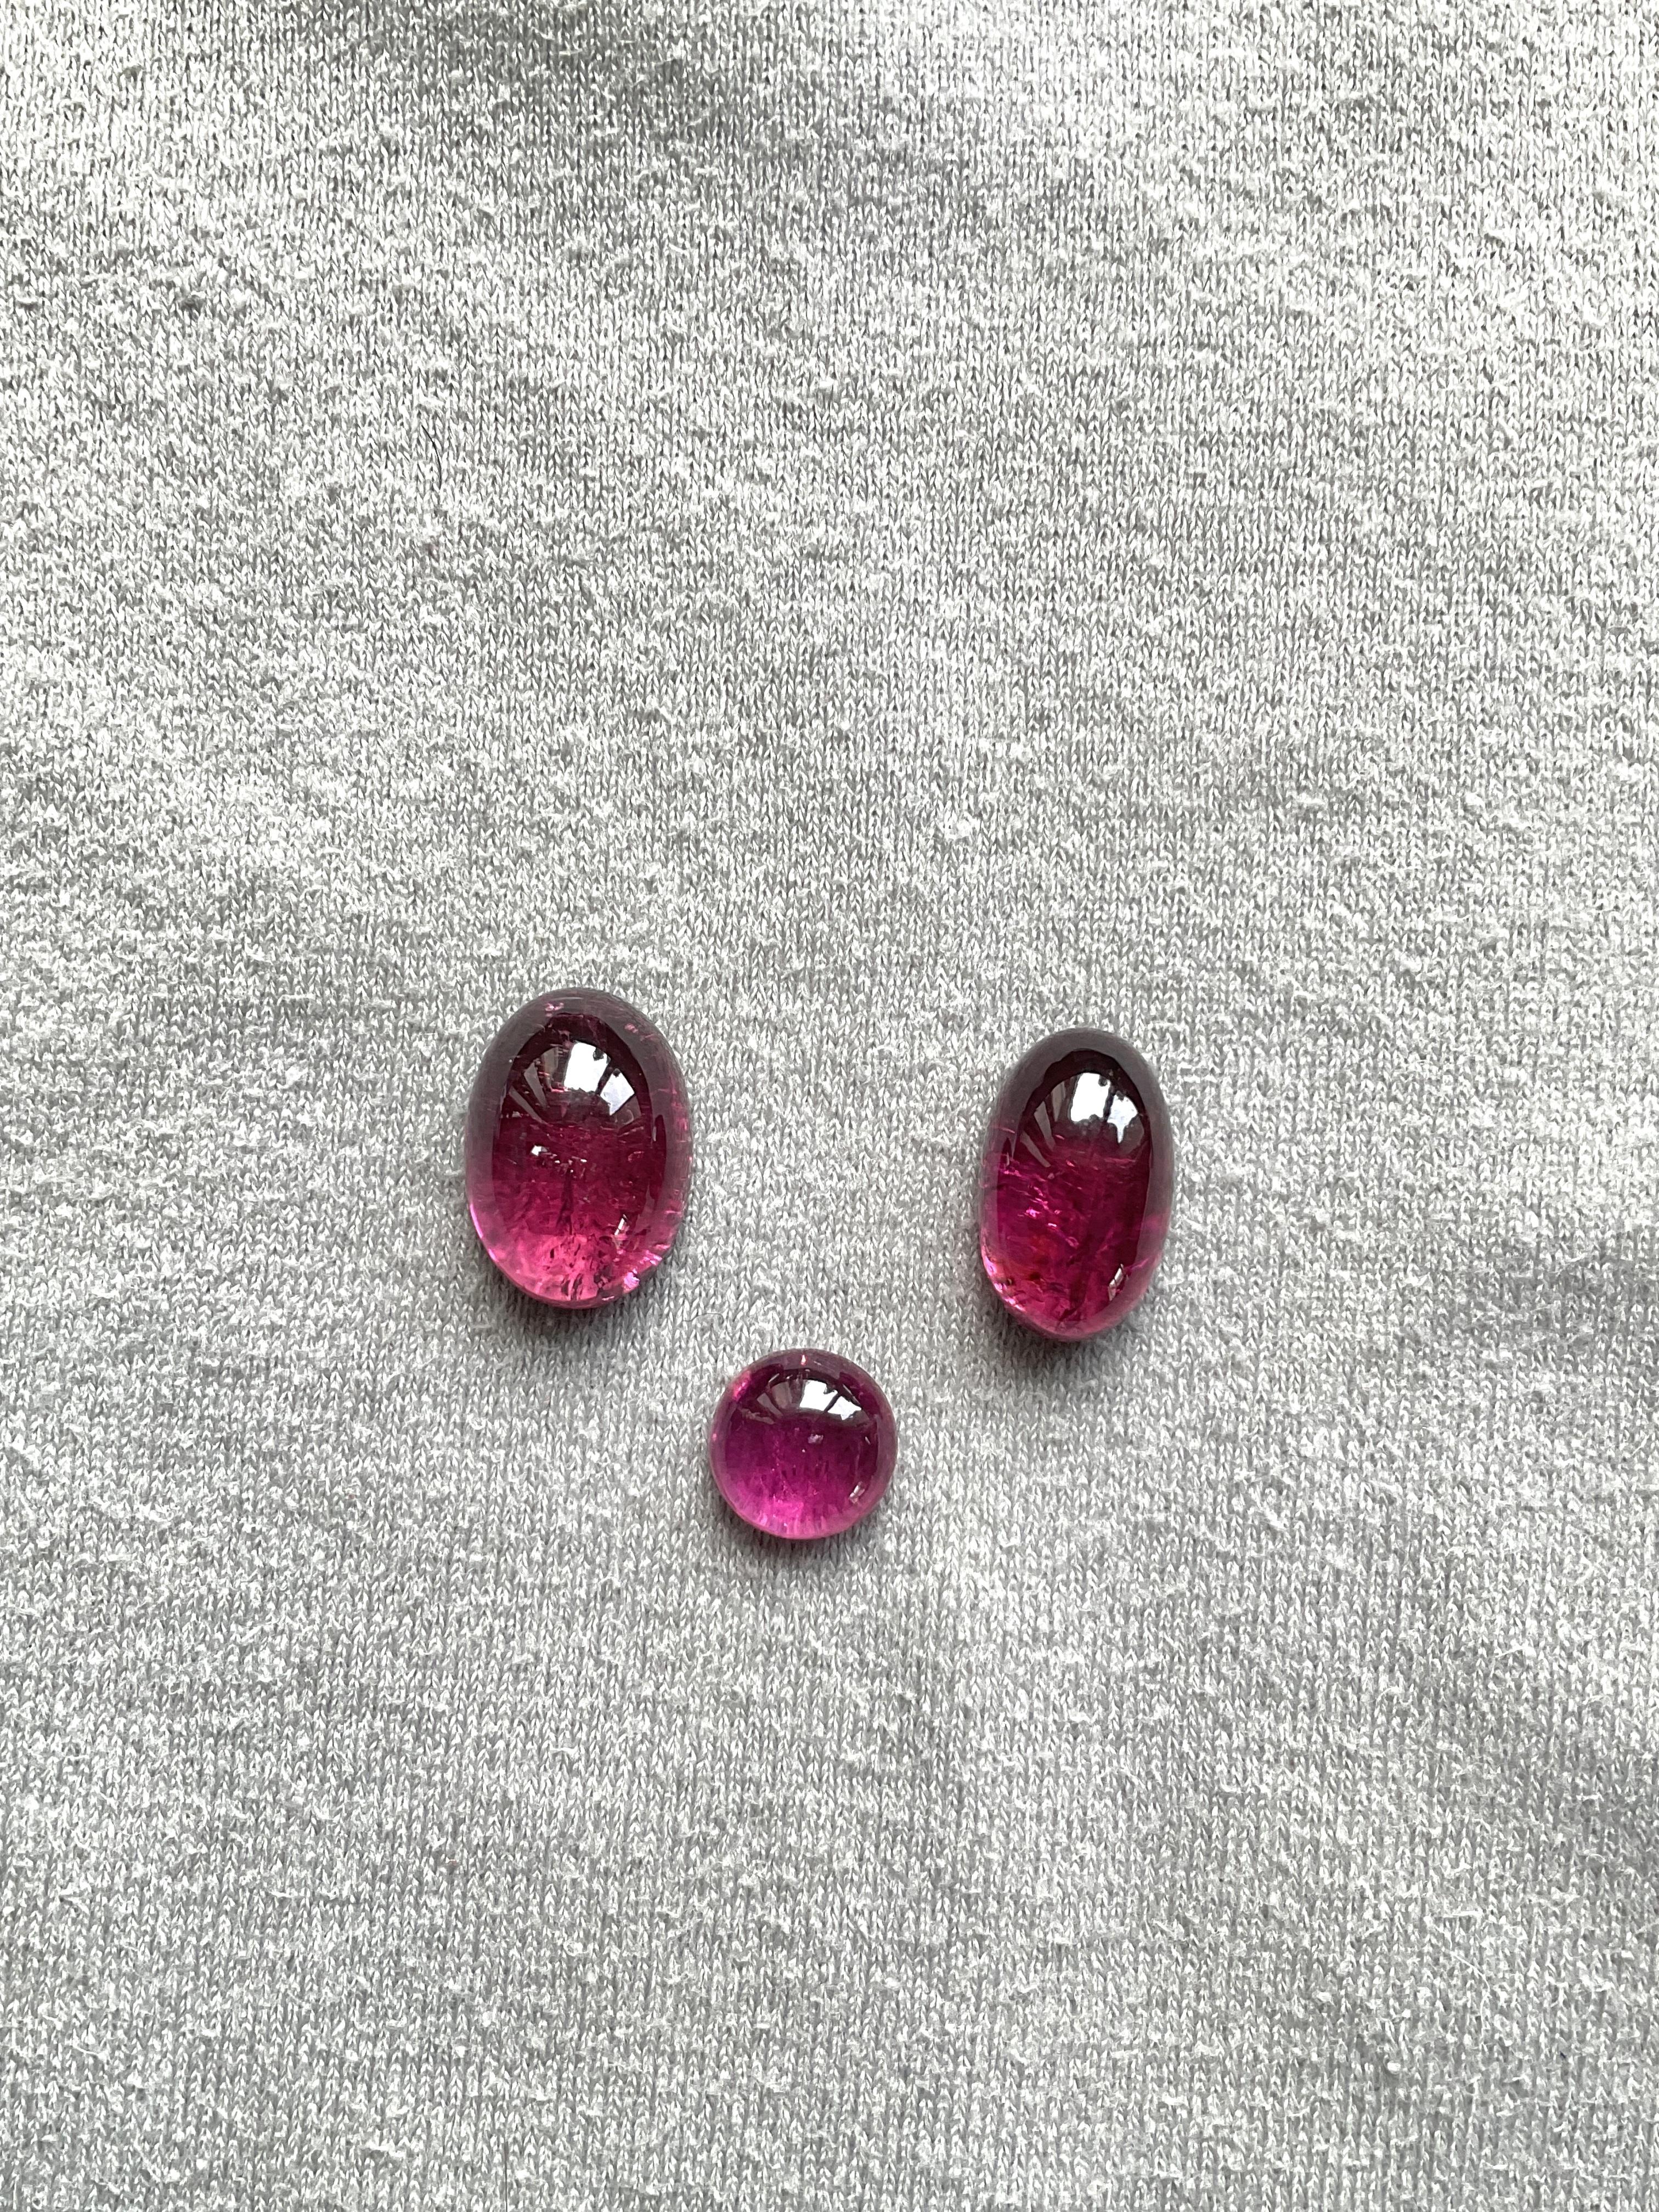 Round Cut 25.21 Carats Top Quality Rubellite Tourmaline Cabochon 3 Pieces Natural Gemstone For Sale